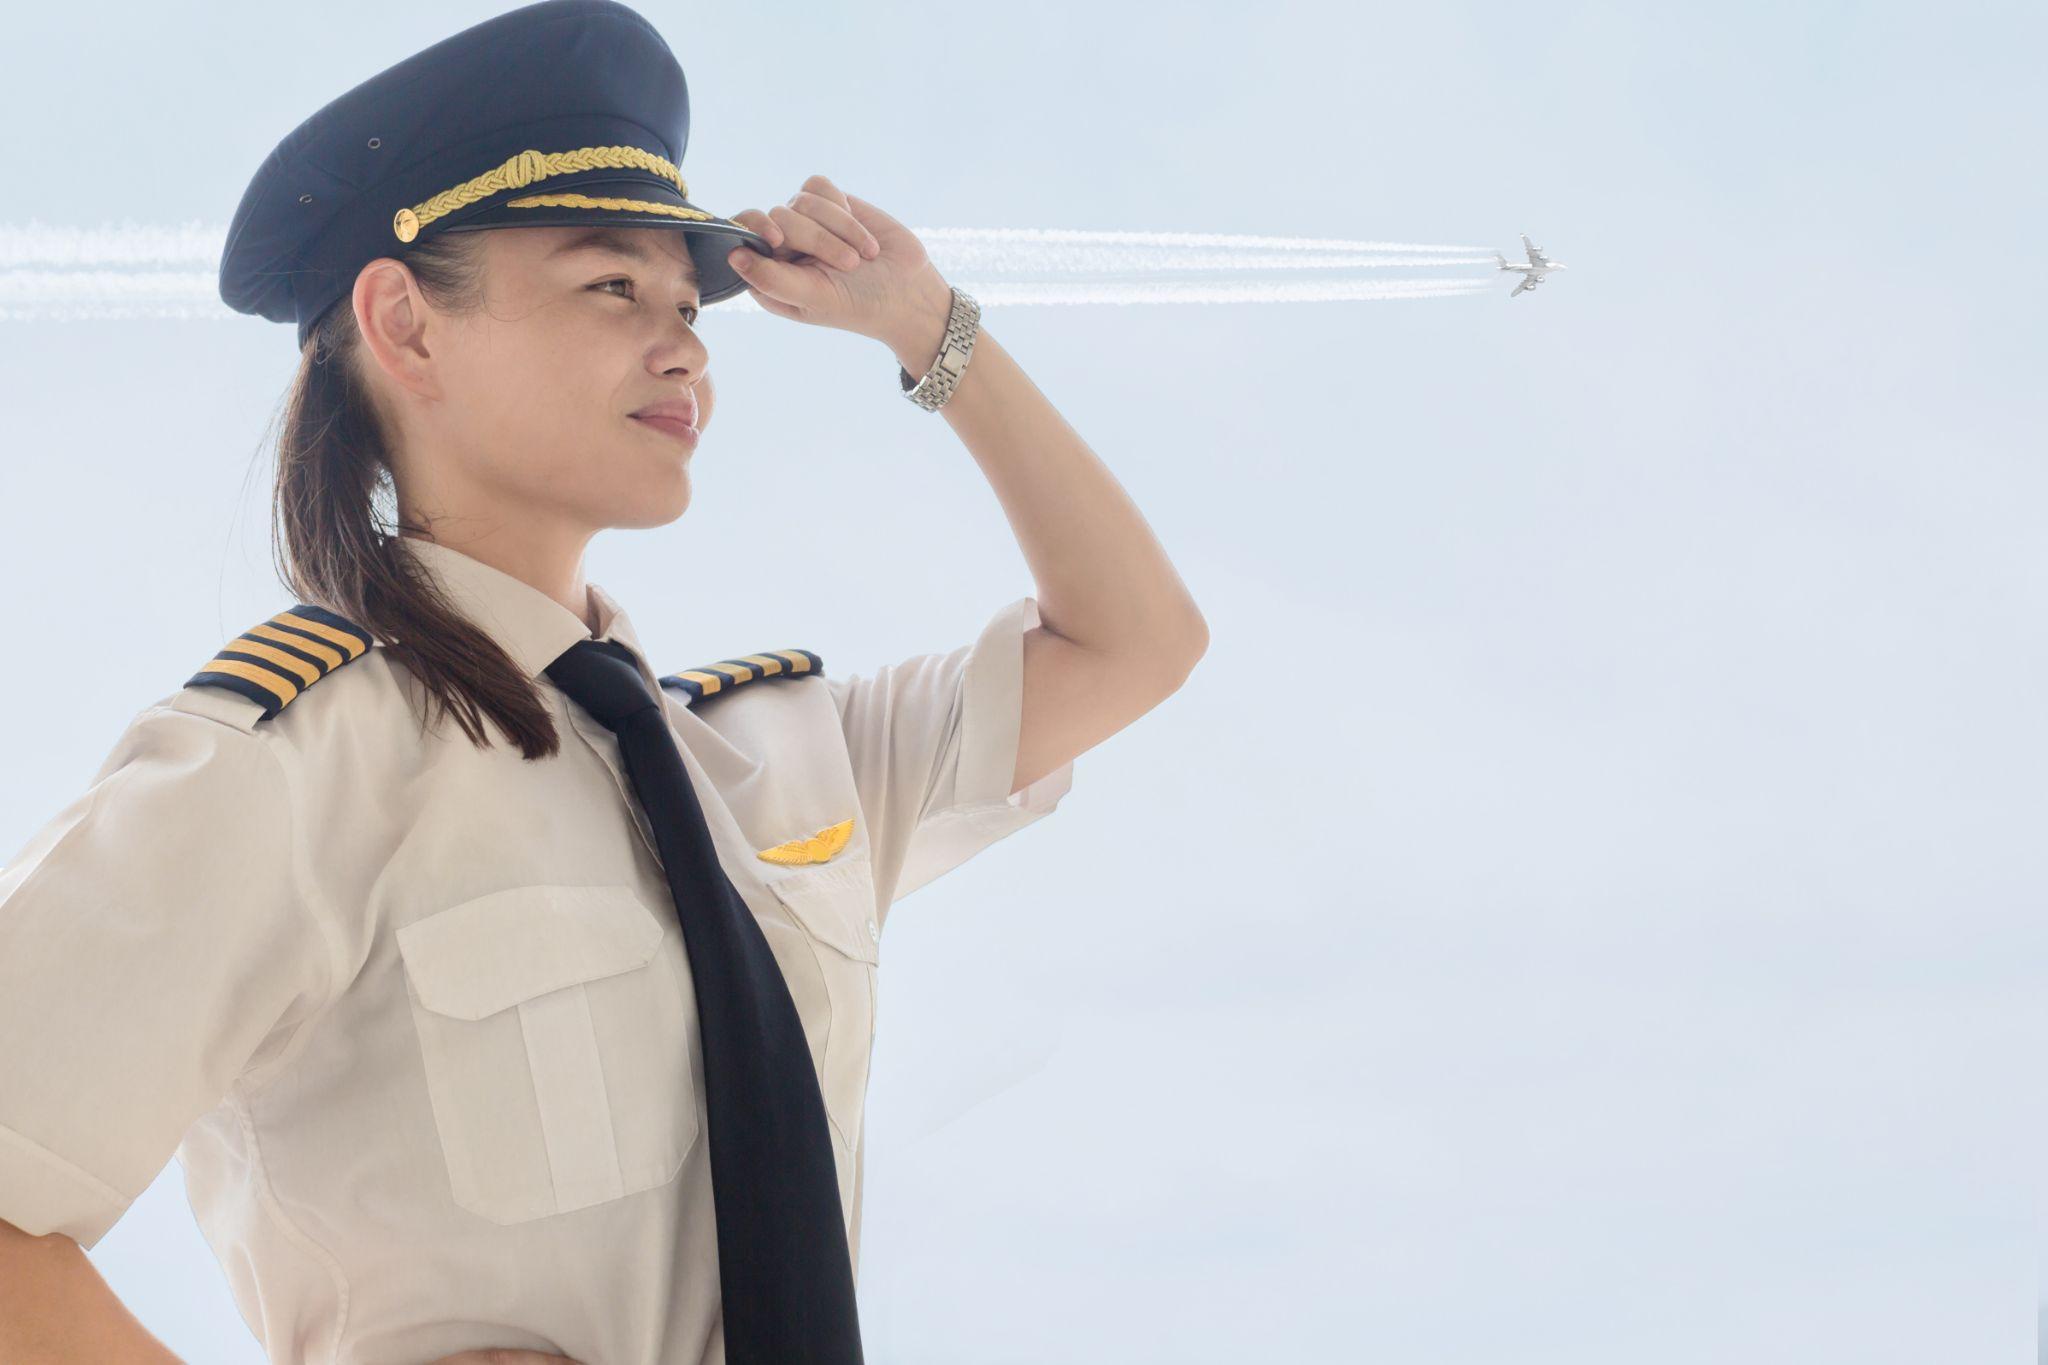 A pretty female pilot standing next to a airplane at the airport.